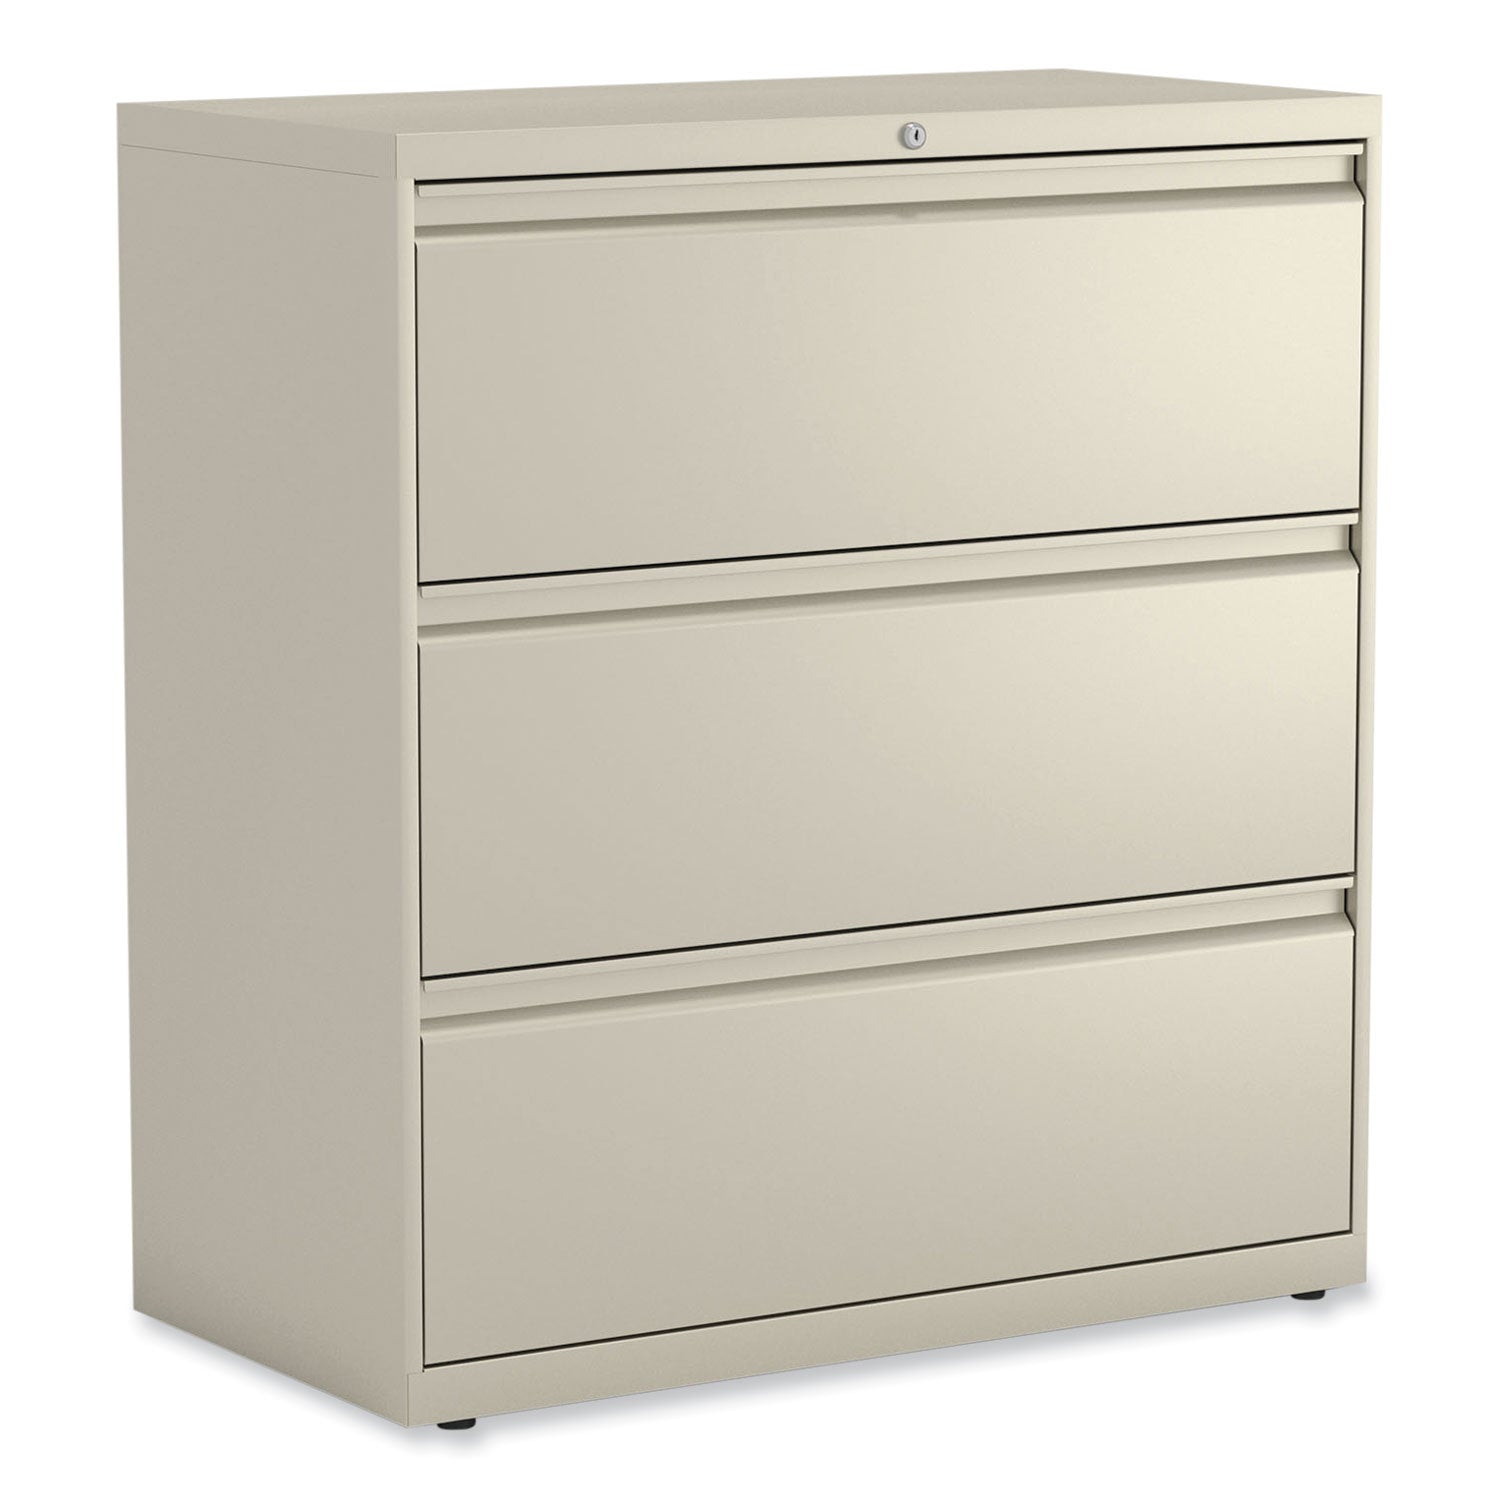 lateral-file-3-legal-letter-a4-a5-size-file-drawers-putty-36-x-1863-x-4025_alehlf3641py - 1